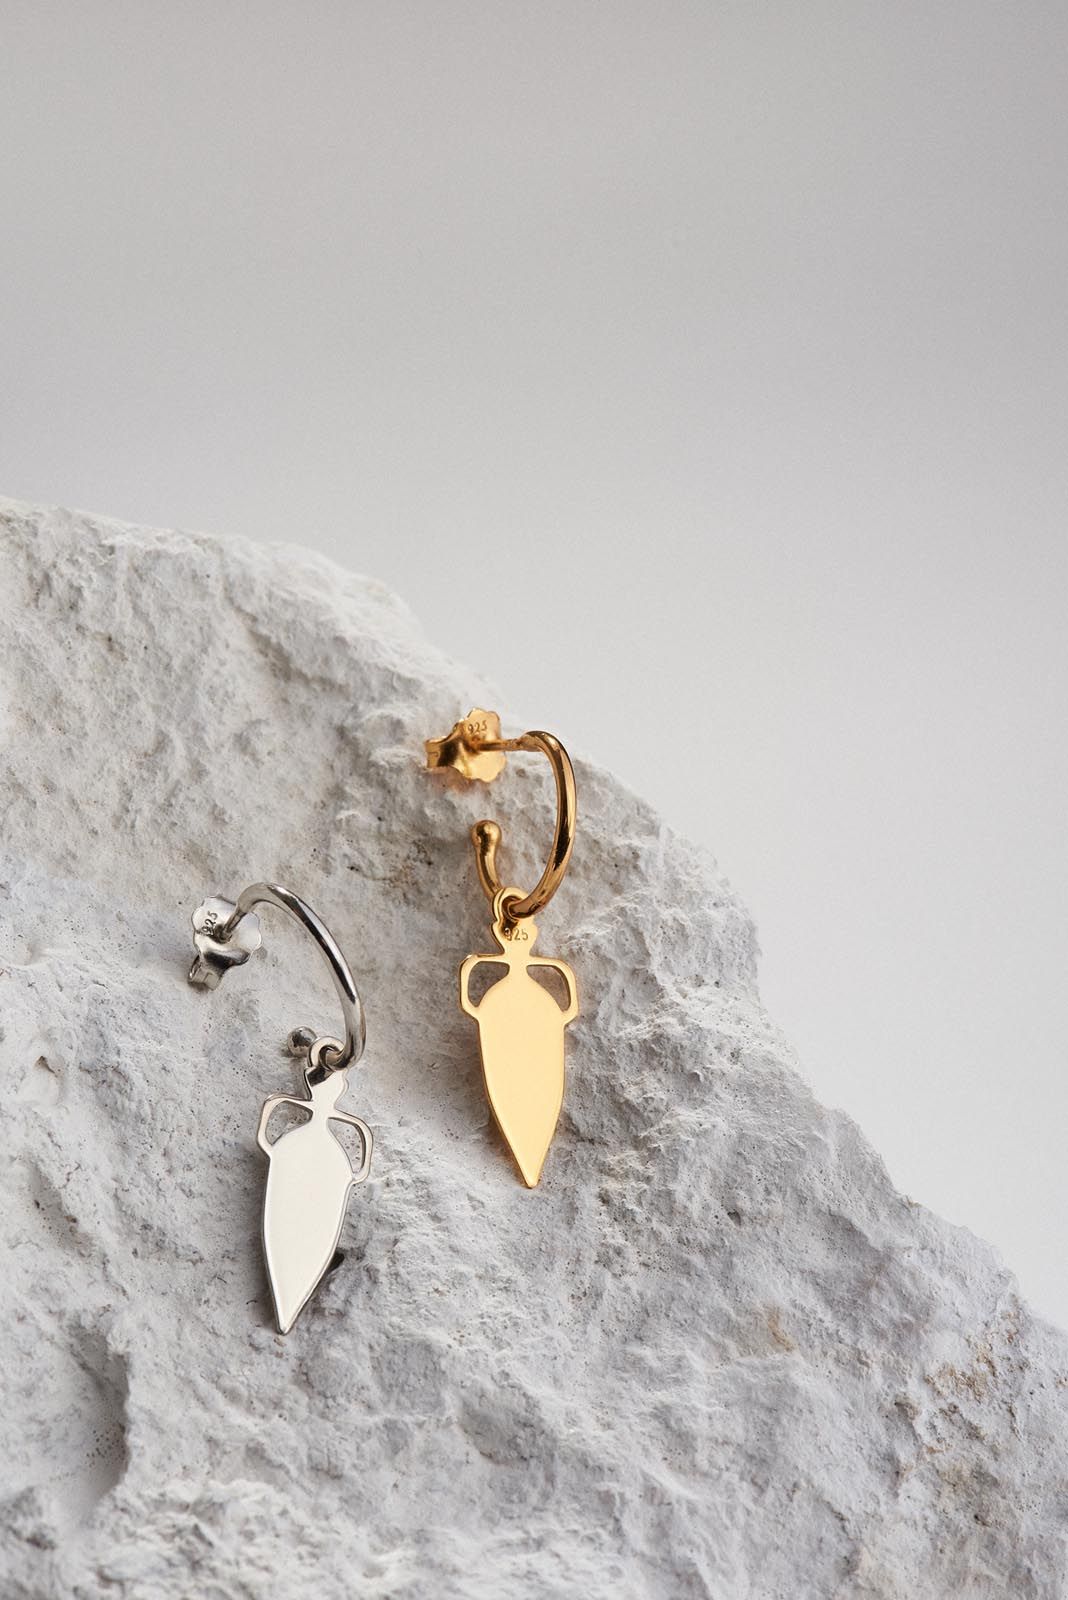 amphora earring in silver and gold